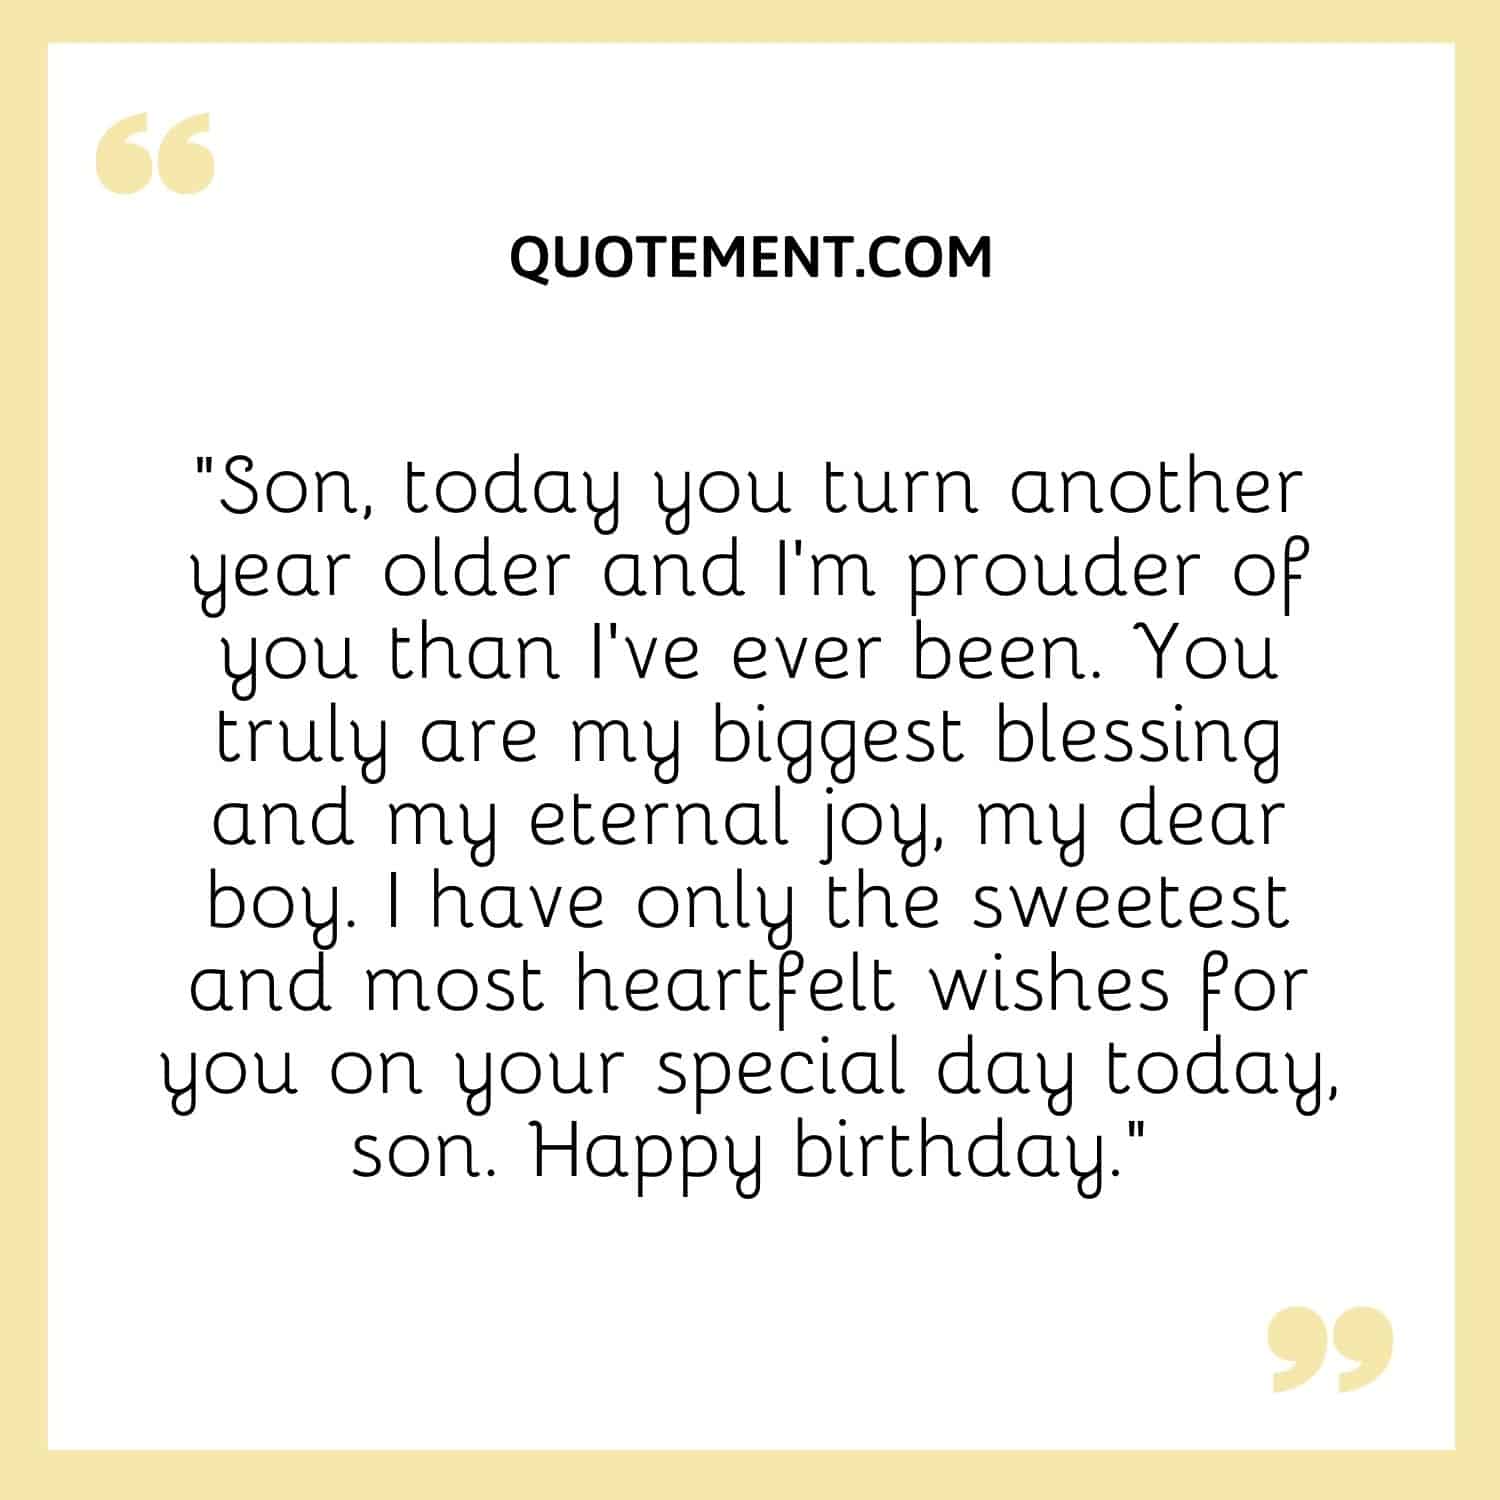 Son, today you turn another year older and I’m prouder of you than I’ve ever been